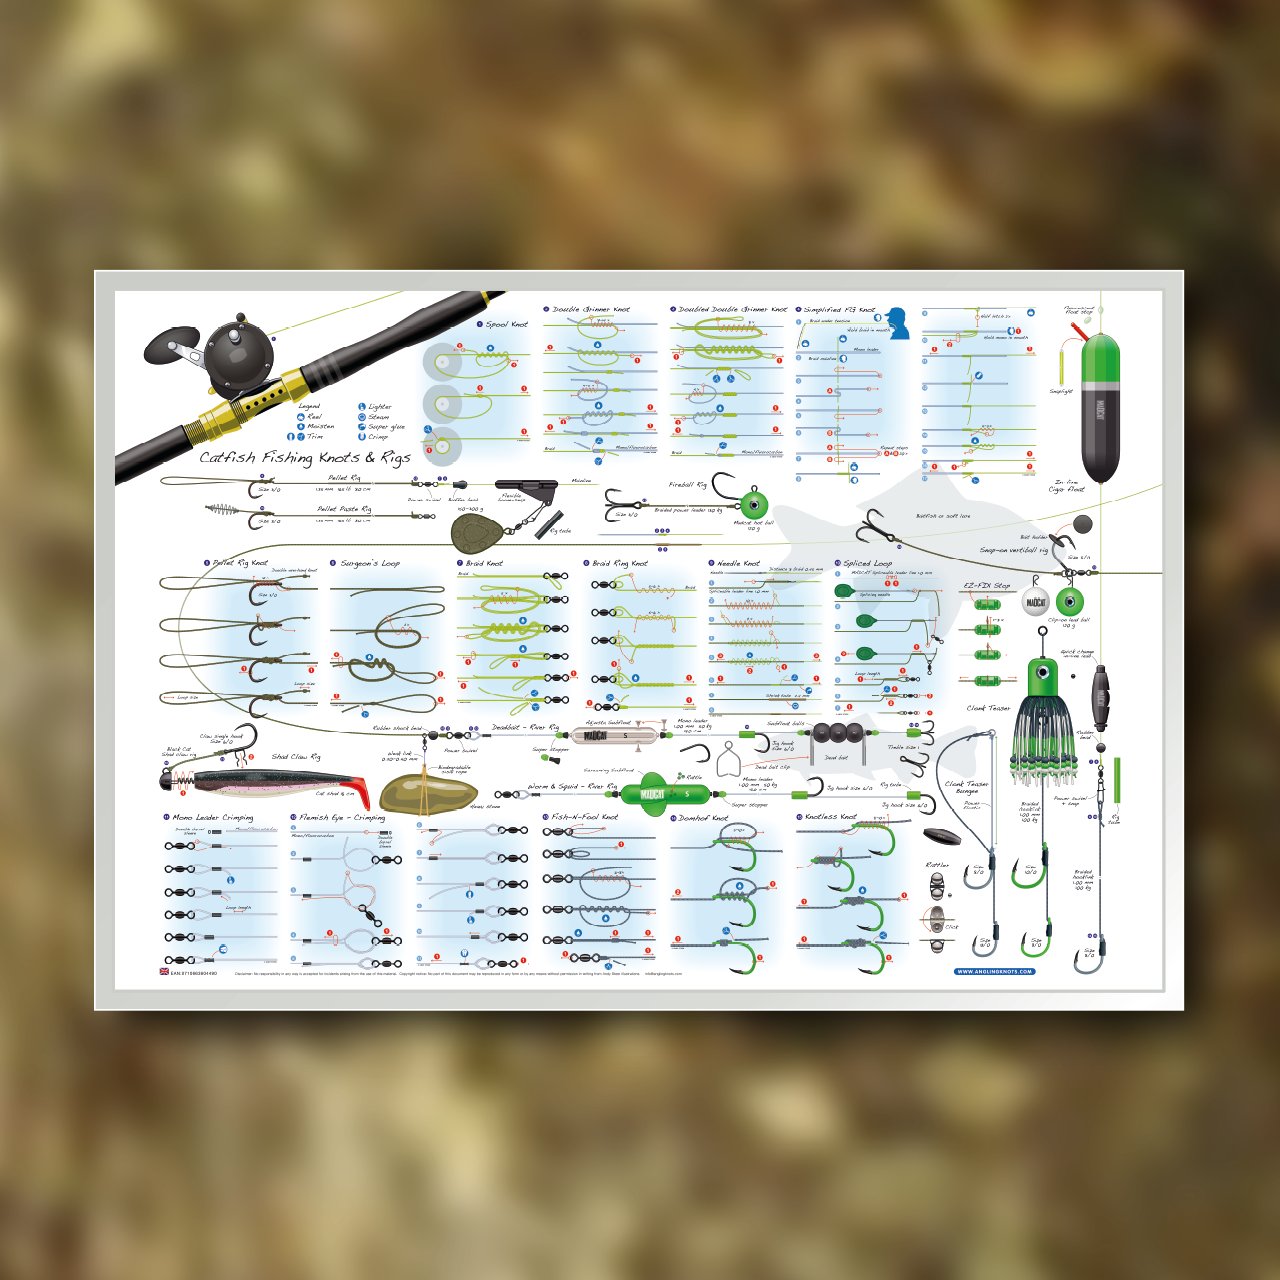 Andy Steer on X: The NEW Catfish Fishing Knots & Rigs Poster is available  at:  #catfish #madcat #lures #silurusglanis  #welscatfish #silurus #siluriformes #wels #siluro #meerval #biggamefishing  #bigfish #fishon #catchandrelease